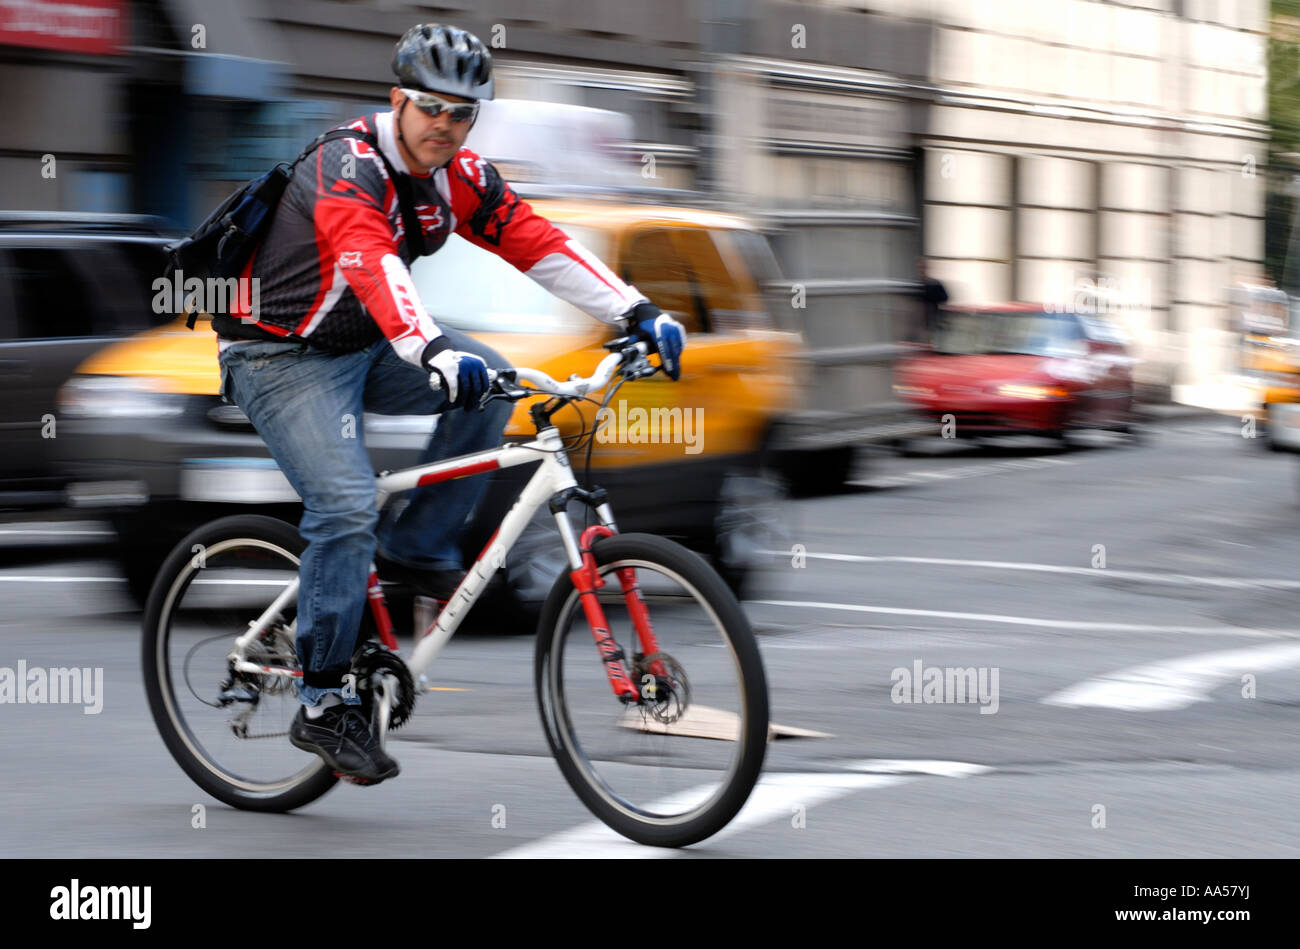 Young_male_bike_messenger_in_traffic_in_